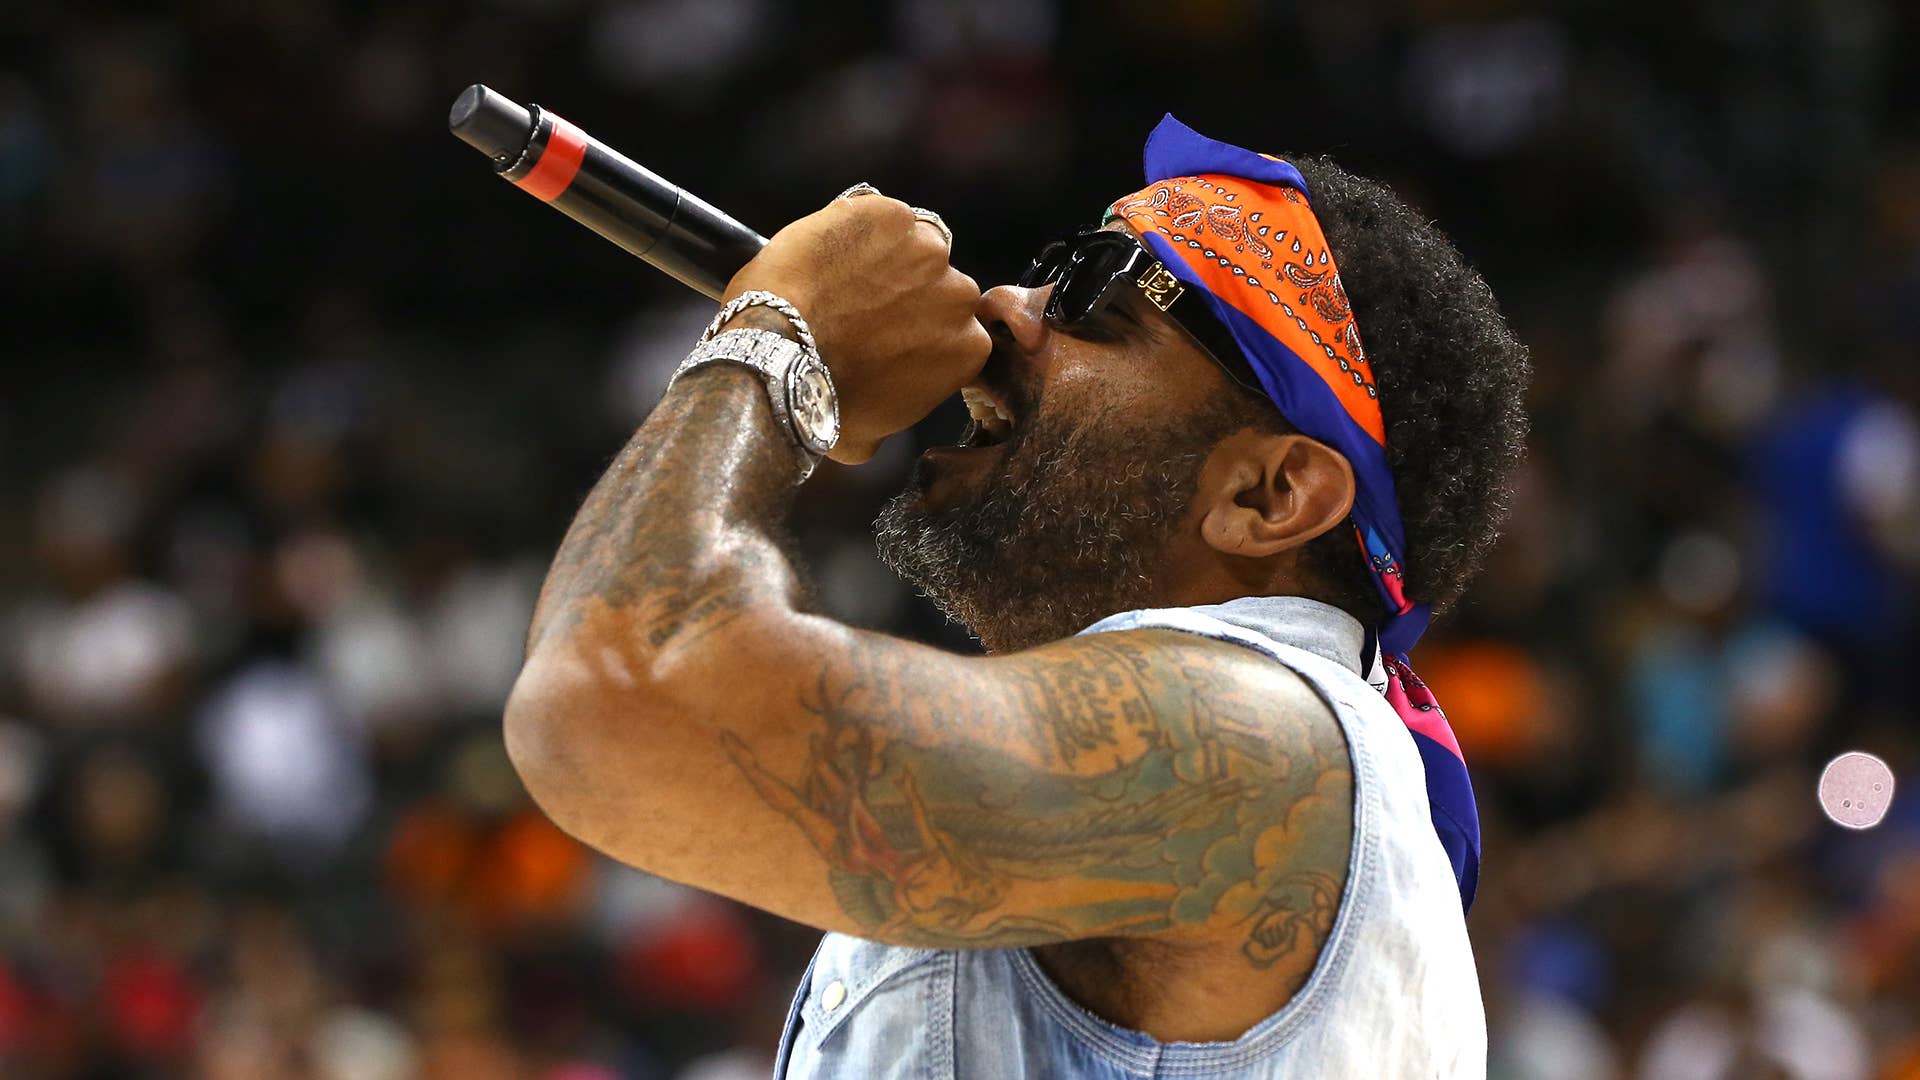 Rapper Jim Jones performs during week four of the BIG3 three on three basketball league at Barclays Center